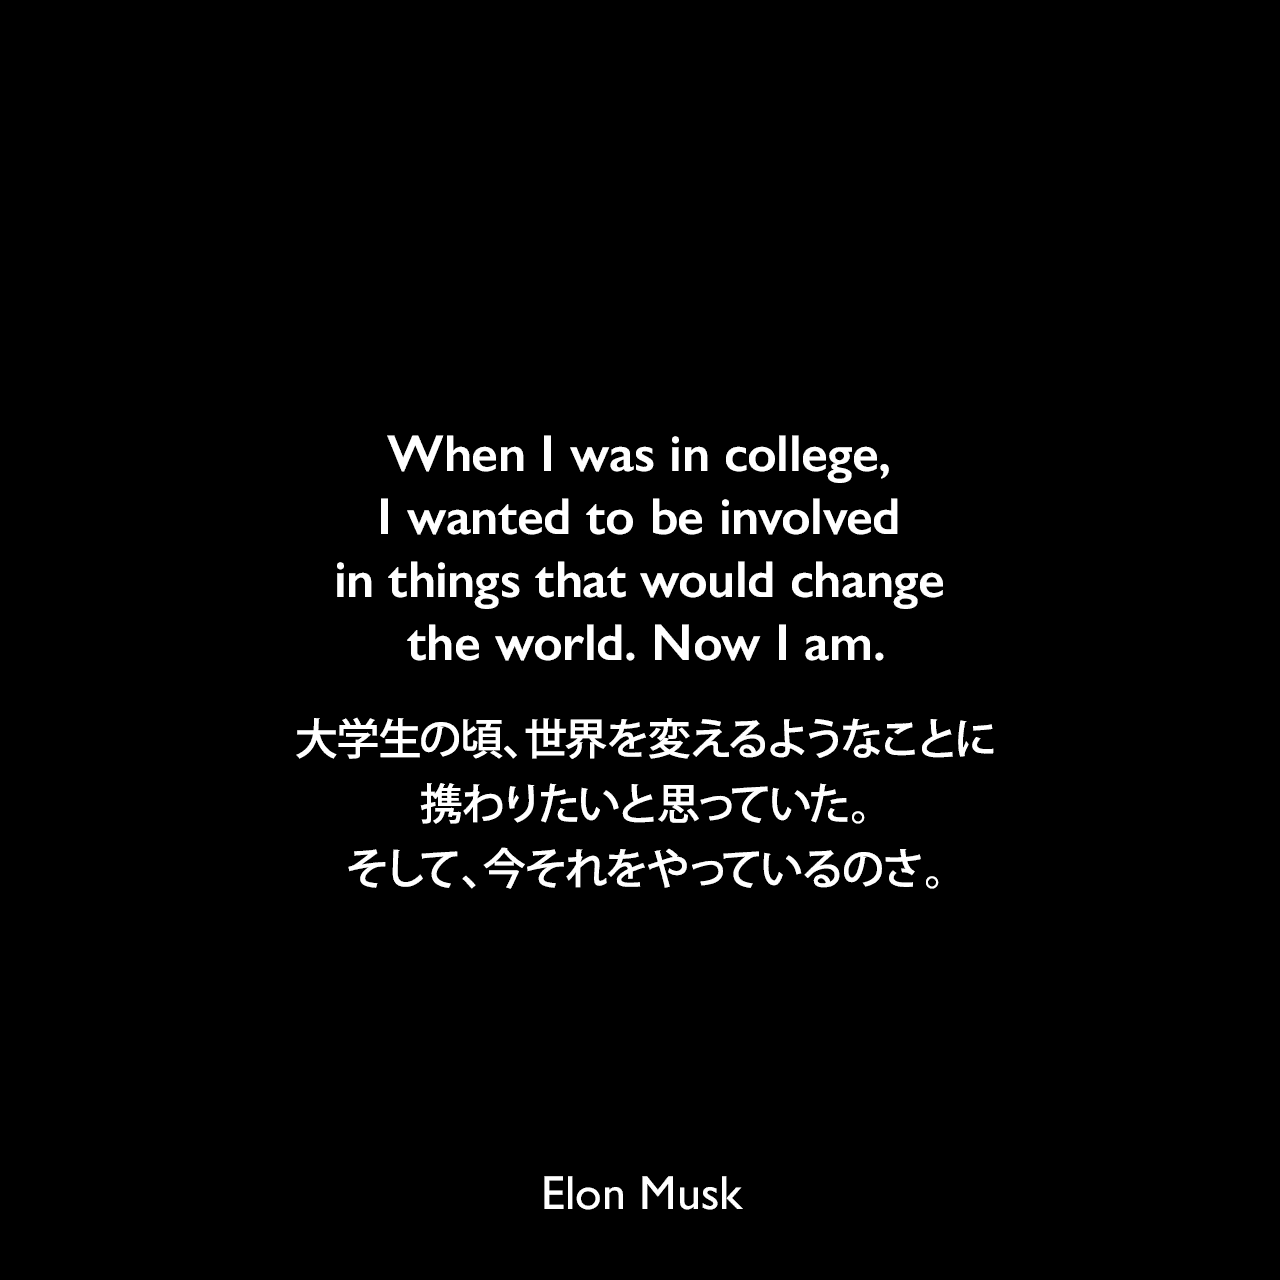 When I was in college, I wanted to be involved in things that would change the world. Now I am.大学生の頃、世界を変えるようなことに携わりたいと思っていた。そして、今それをやっているのさ。Elon Musk